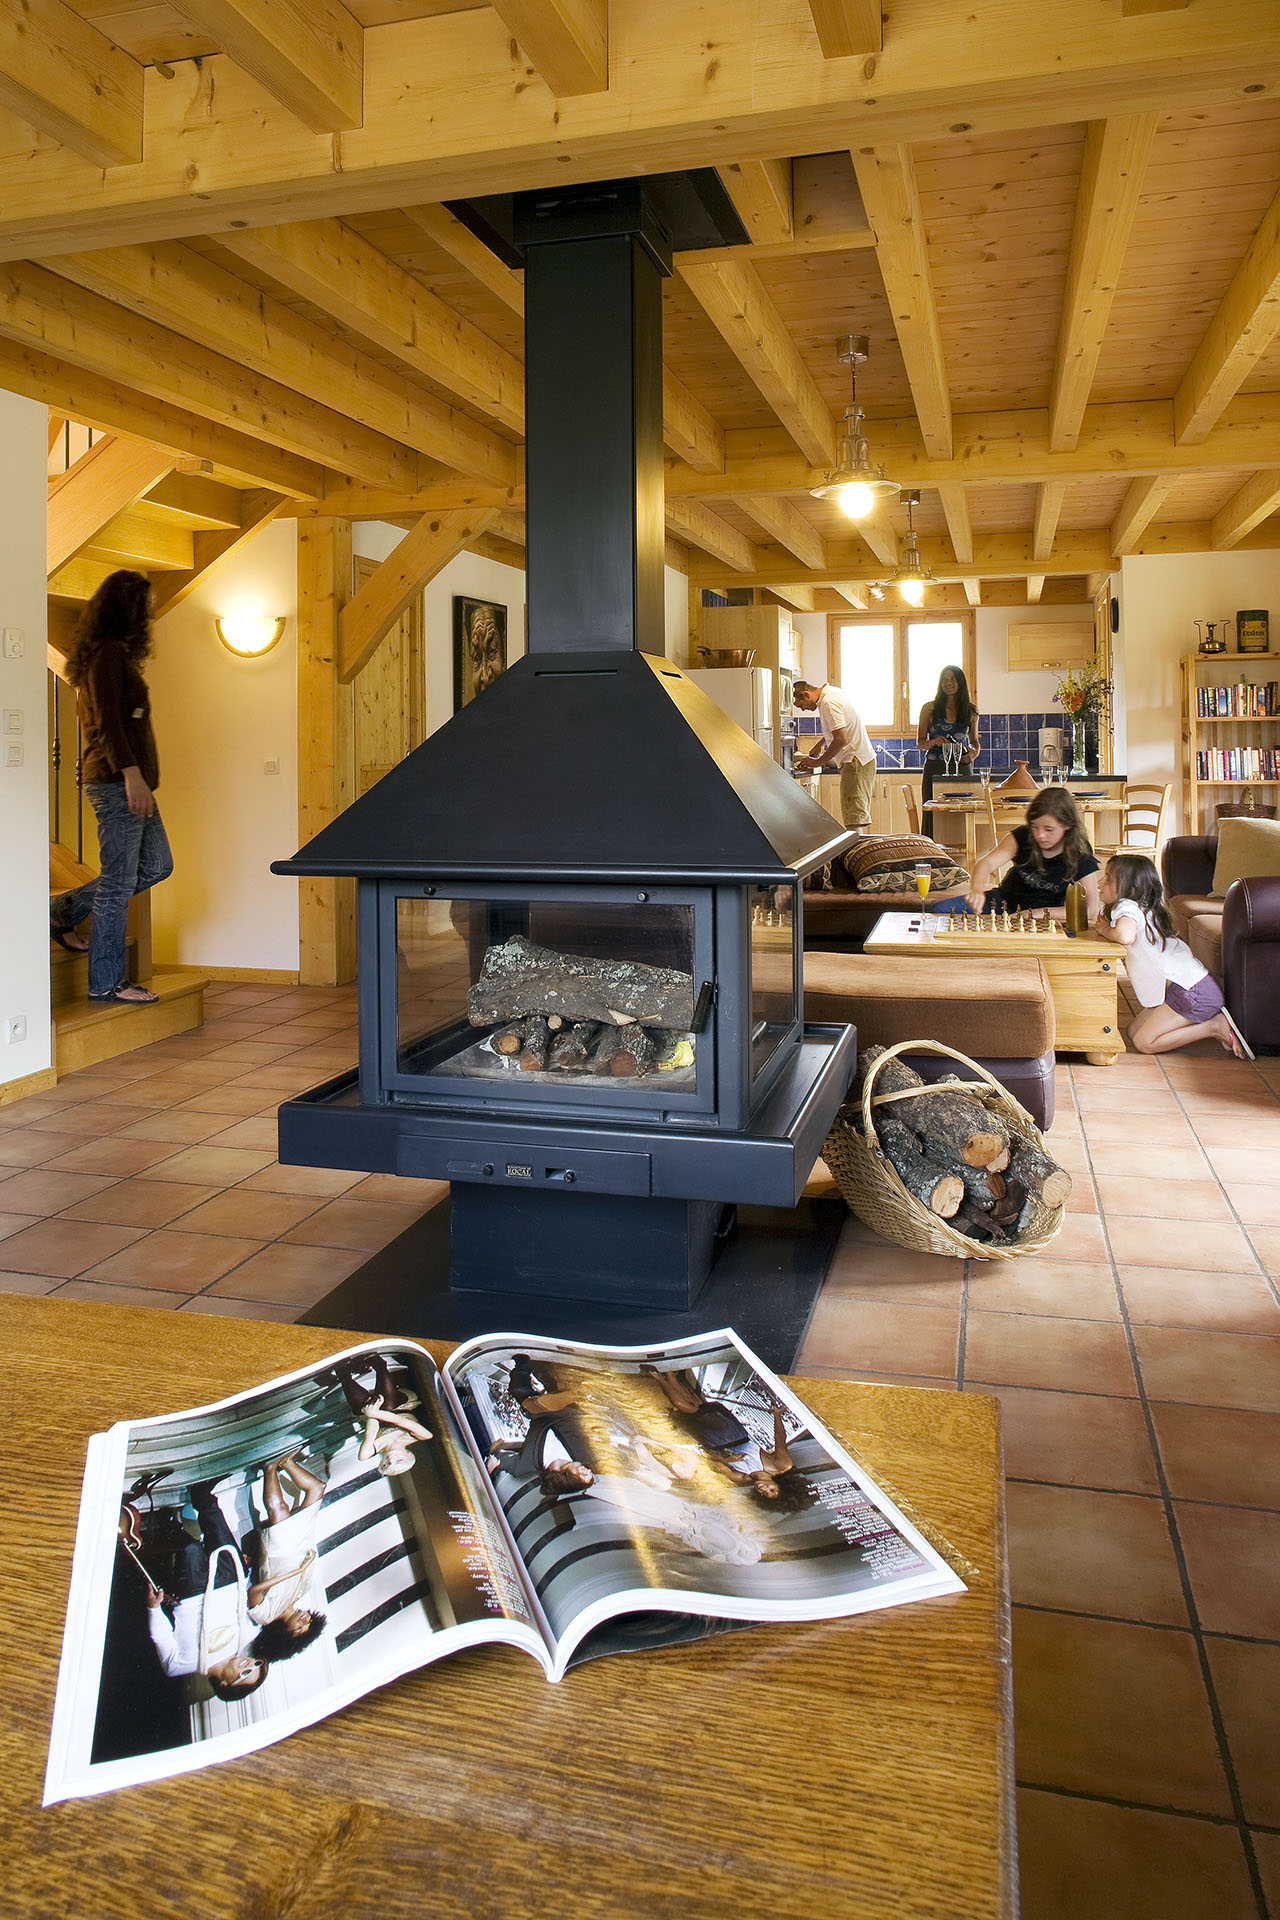 Life-style photo of main living area within chalet